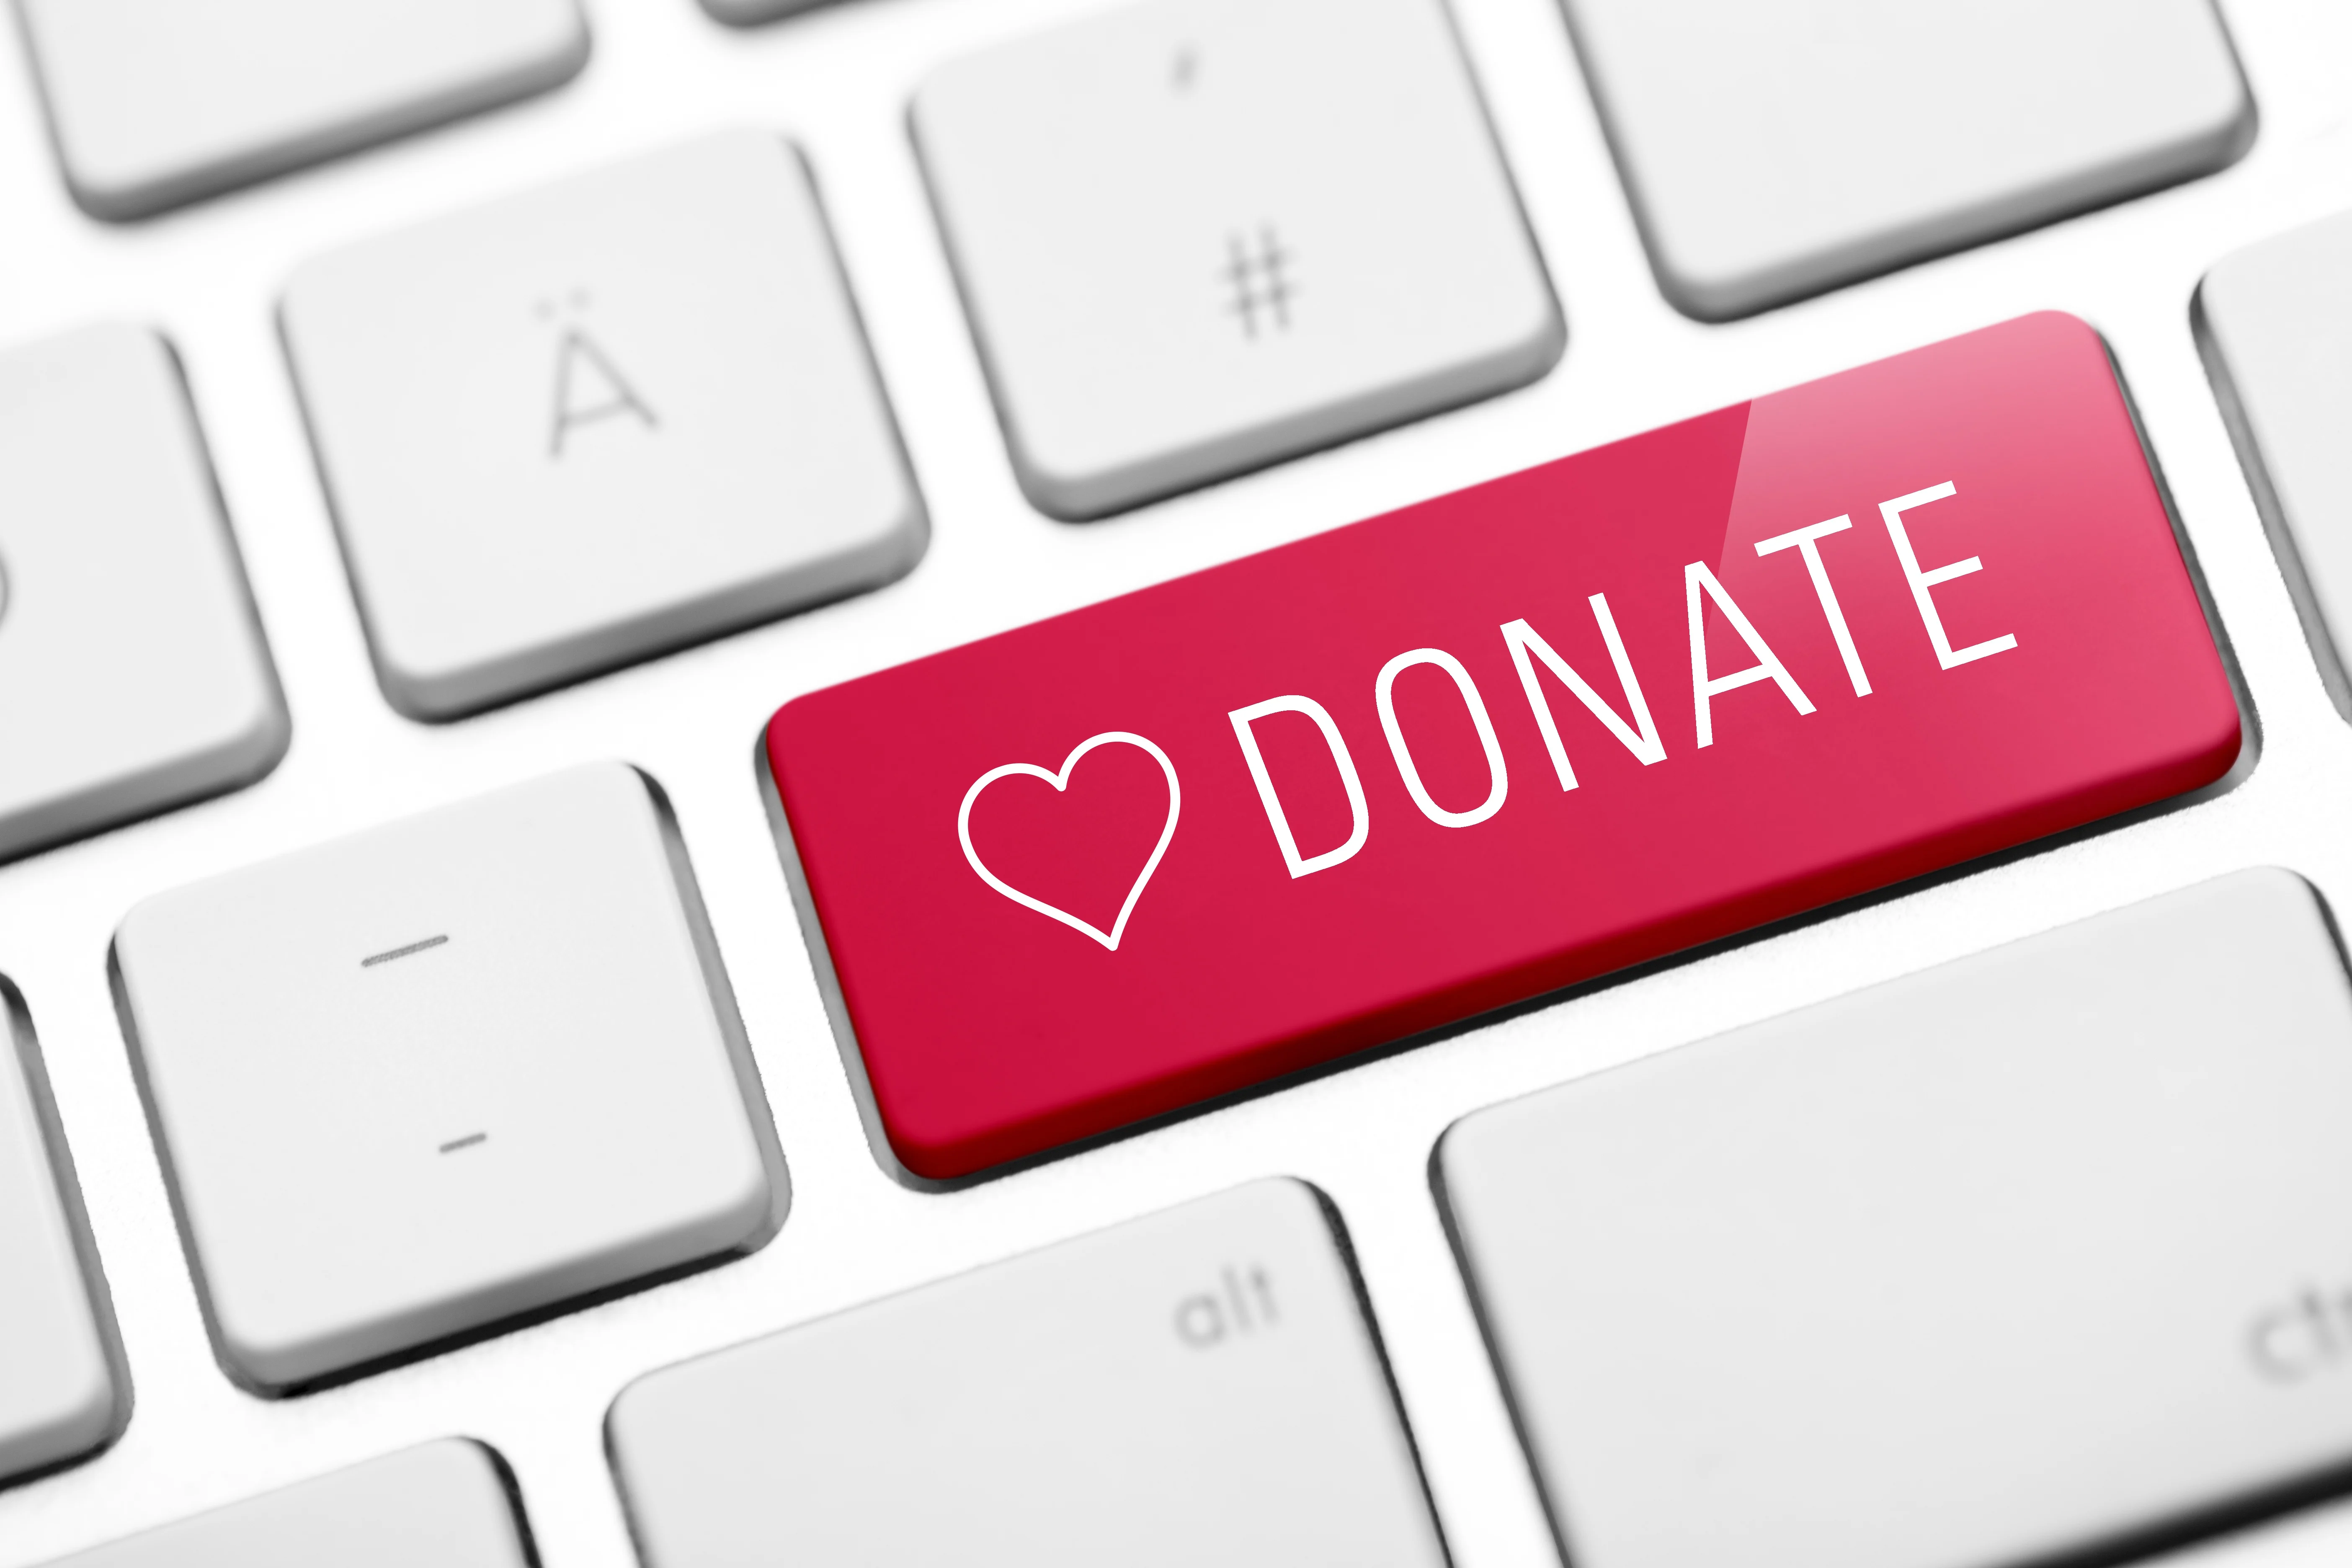 4 Tips To Raise More Money with Peer to Peer Fundraising